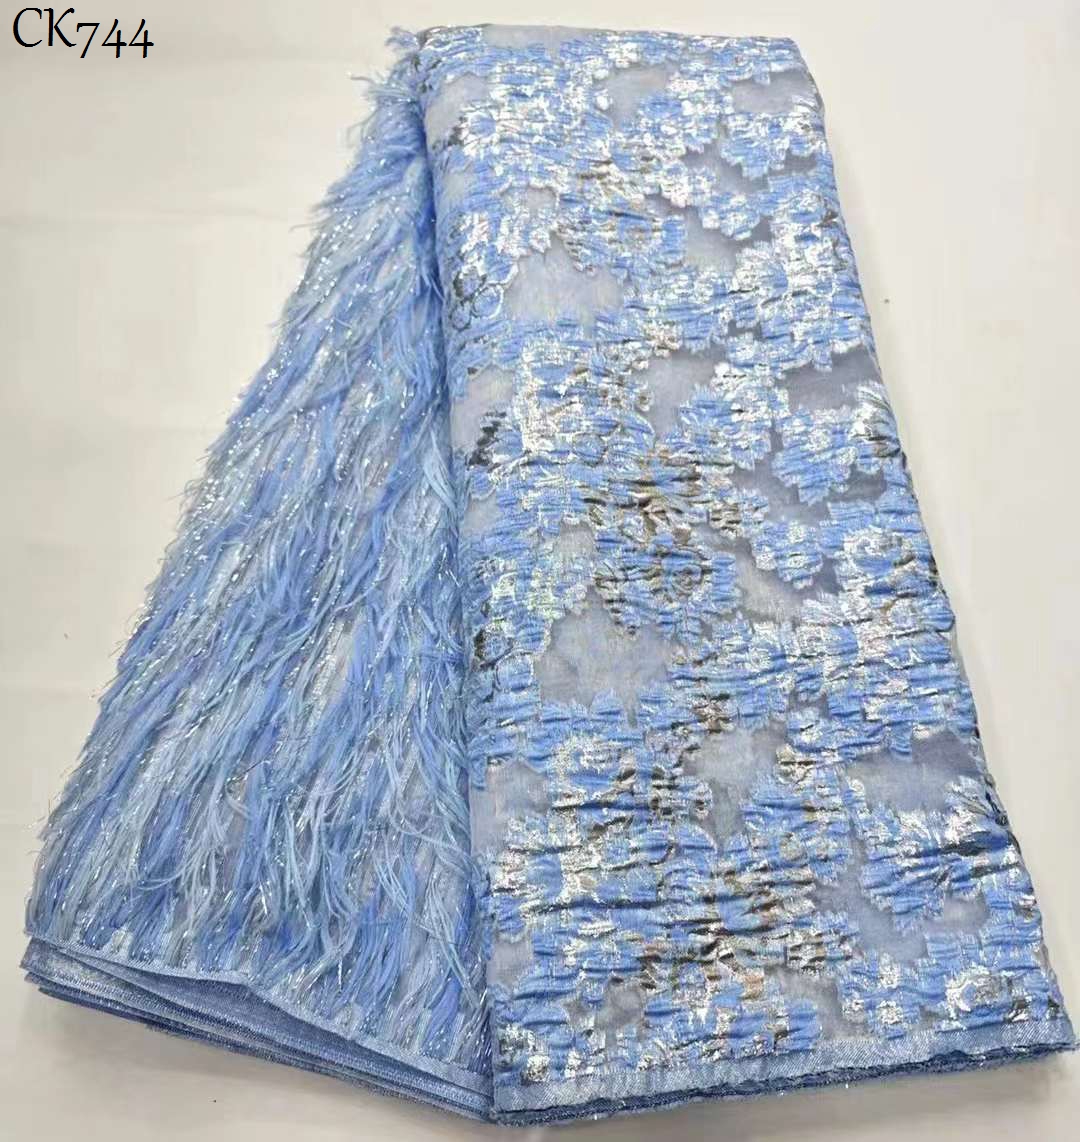 African Brocade Fabric Latest Nigerian French Jacquard Lace Dubai Style Lace Fabric for Wedding Party